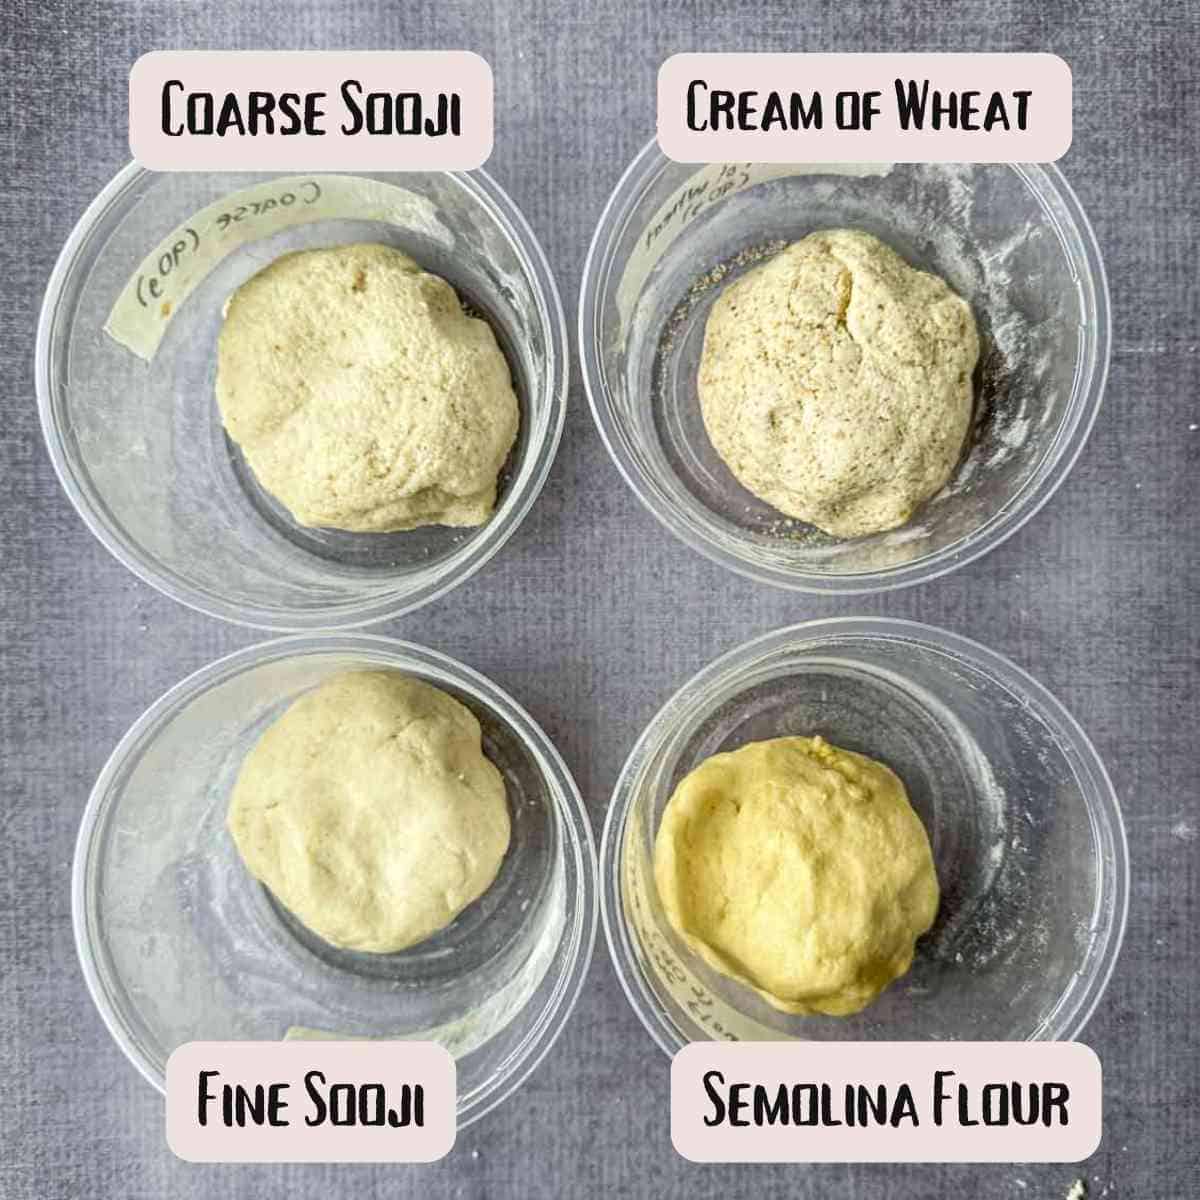 Four different types of doughs used for pani puri. Top left is coarse sooji, top right is cream of wheat or farina, bottom left is fine sooji, and bottom right is semolina flour